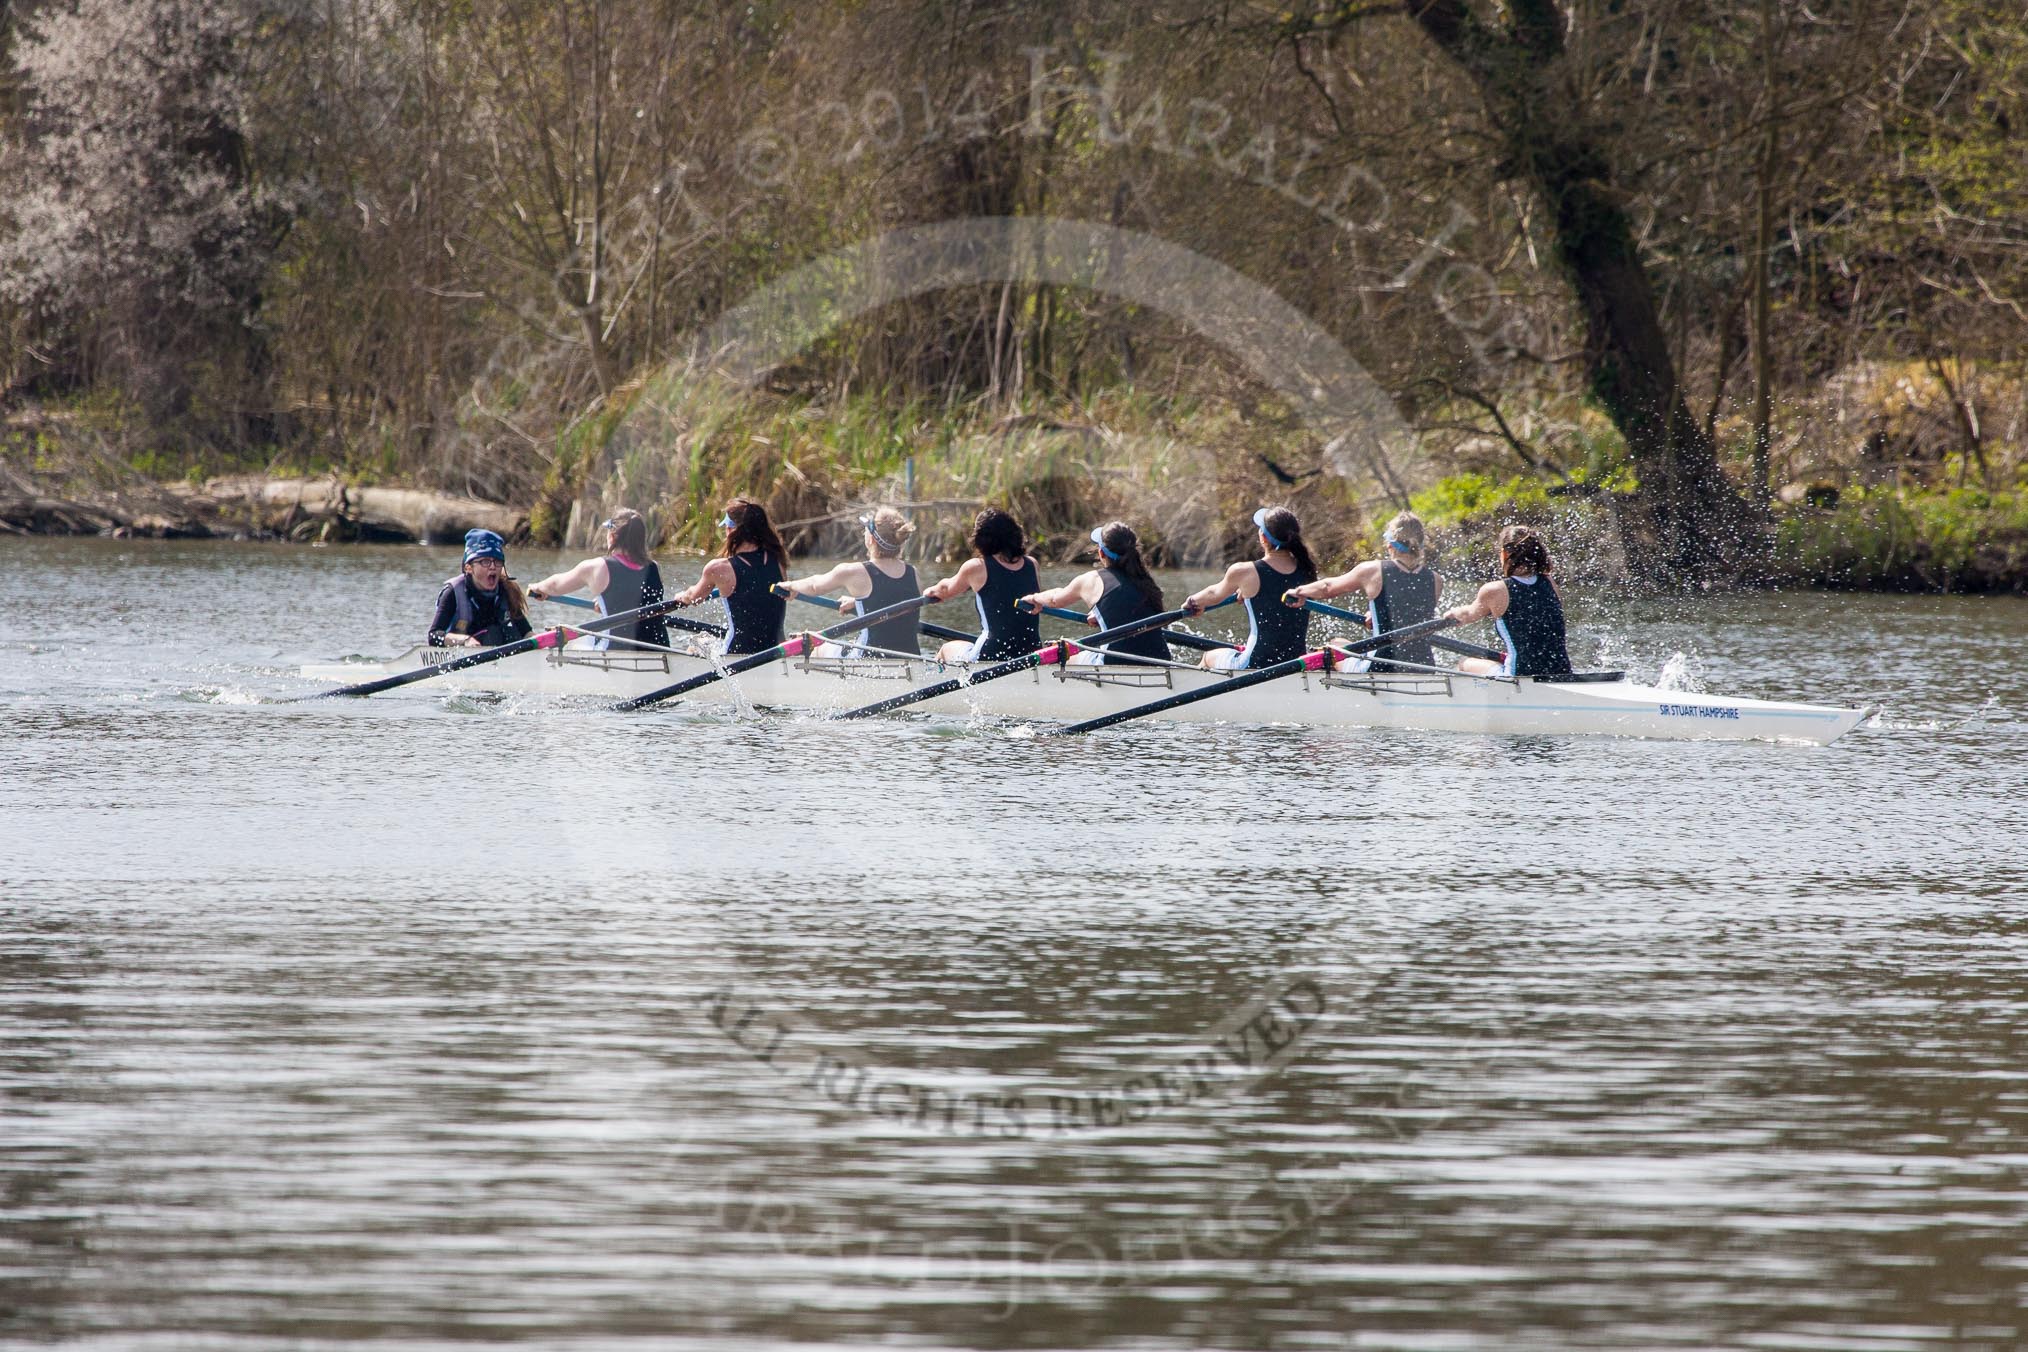 The Women's Boat Race and Henley Boat Races 2014: The Intercollegiate women's race. In the Wadham College (Oxford) boat are cox Harriet-Rose Noons, stroke Hannah Lewis, 7 Katia Mandaltsi, 6 Stephanie Hall, 5 Canna Whyte, 4 Rachel Anderson, 3 Lia Orlando, 2 Anne Binderup and bow Ani Zotti..
River Thames,
Henley-on-Thames,
Buckinghamshire,
United Kingdom,
on 30 March 2014 at 13:27, image #11